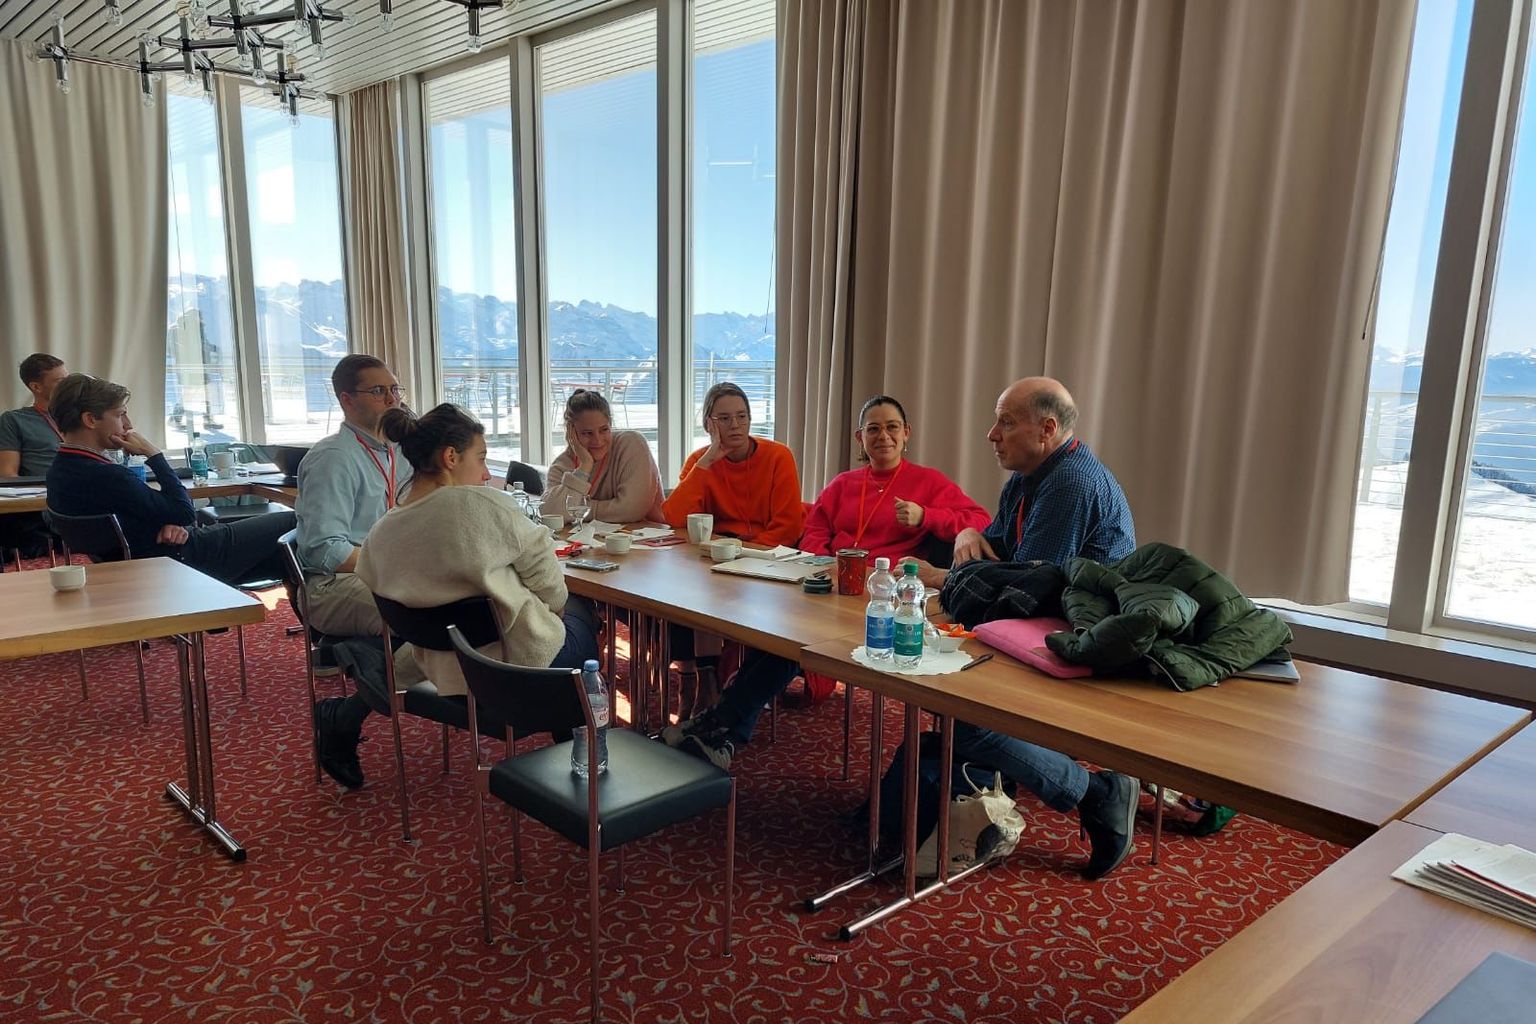 Rigi Workshop 2023 - Discussions during group work